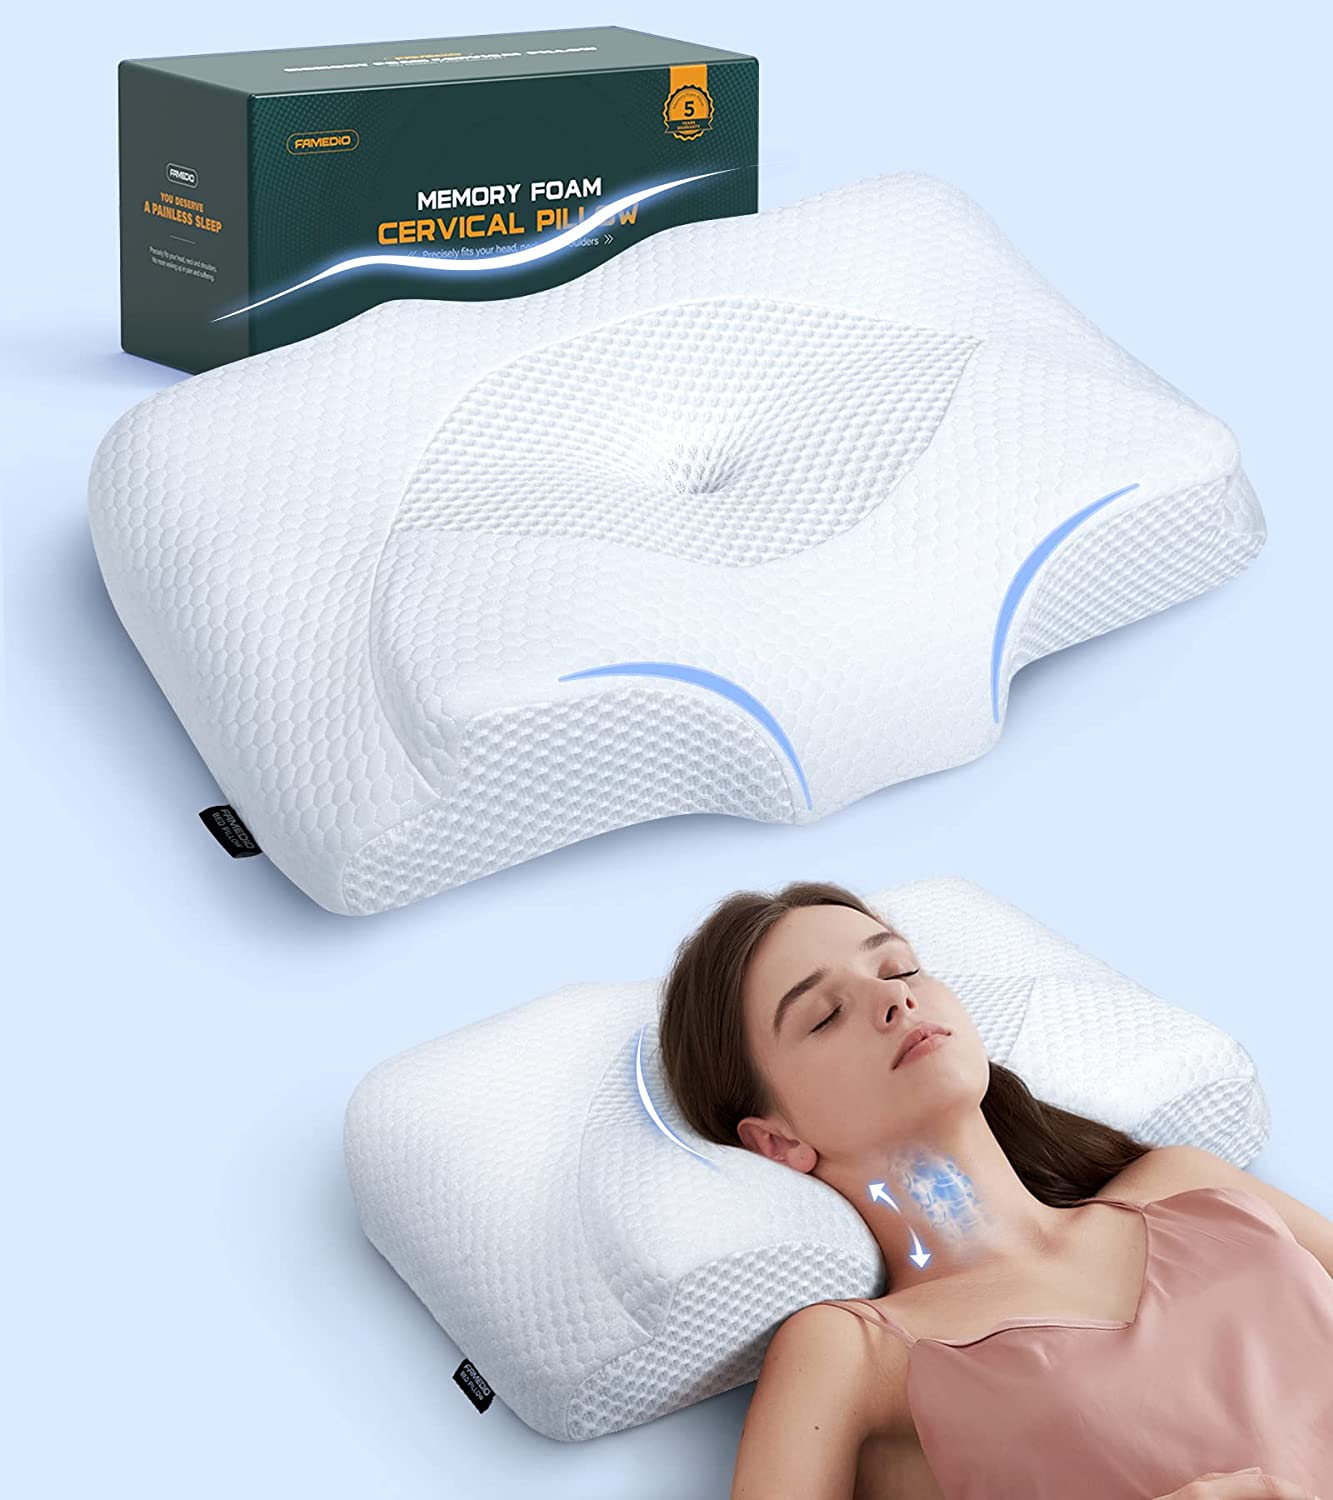 Adjustable Cervical Pillow for Neck Pain Relief, Hollow Contour Memory Foam Pillows Plus Support, Odorless Orthopedic Bed Pillows for Sleeping, Shoulder Pillow for Side Back Stomach Sleeper